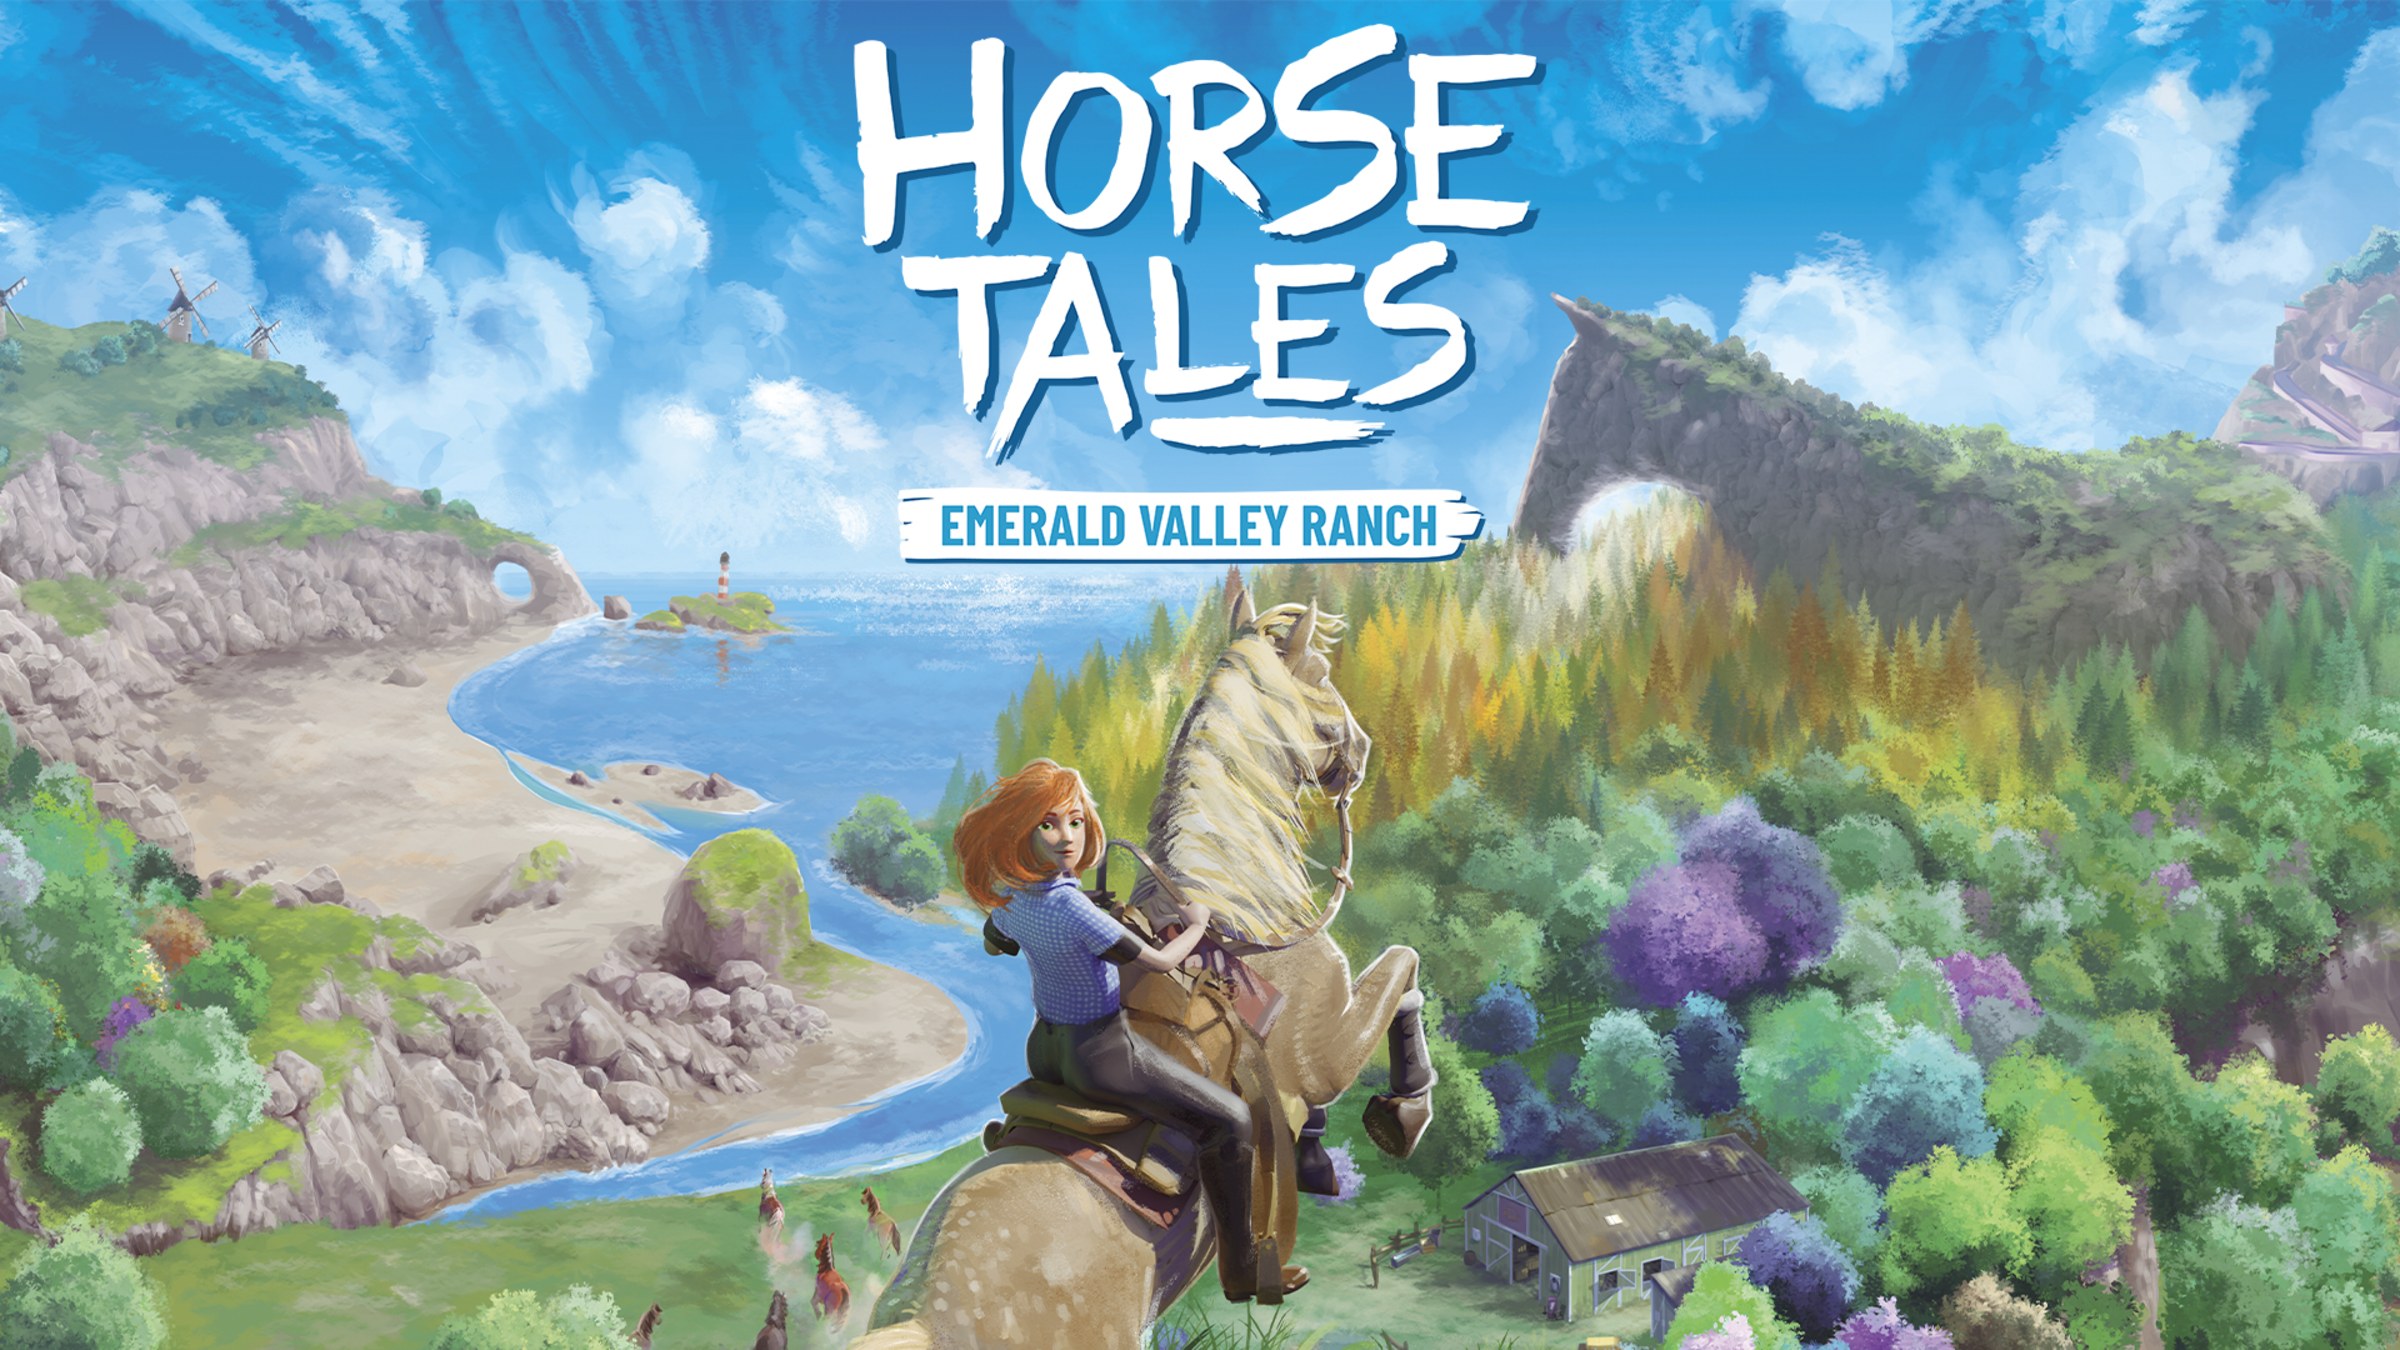 https://assets.nintendo.com/image/upload/c_fill,w_1200/q_auto:best/f_auto/dpr_2.0/ncom/en_US/games/switch/h/horse-tales-emerald-valley-ranch-switch/